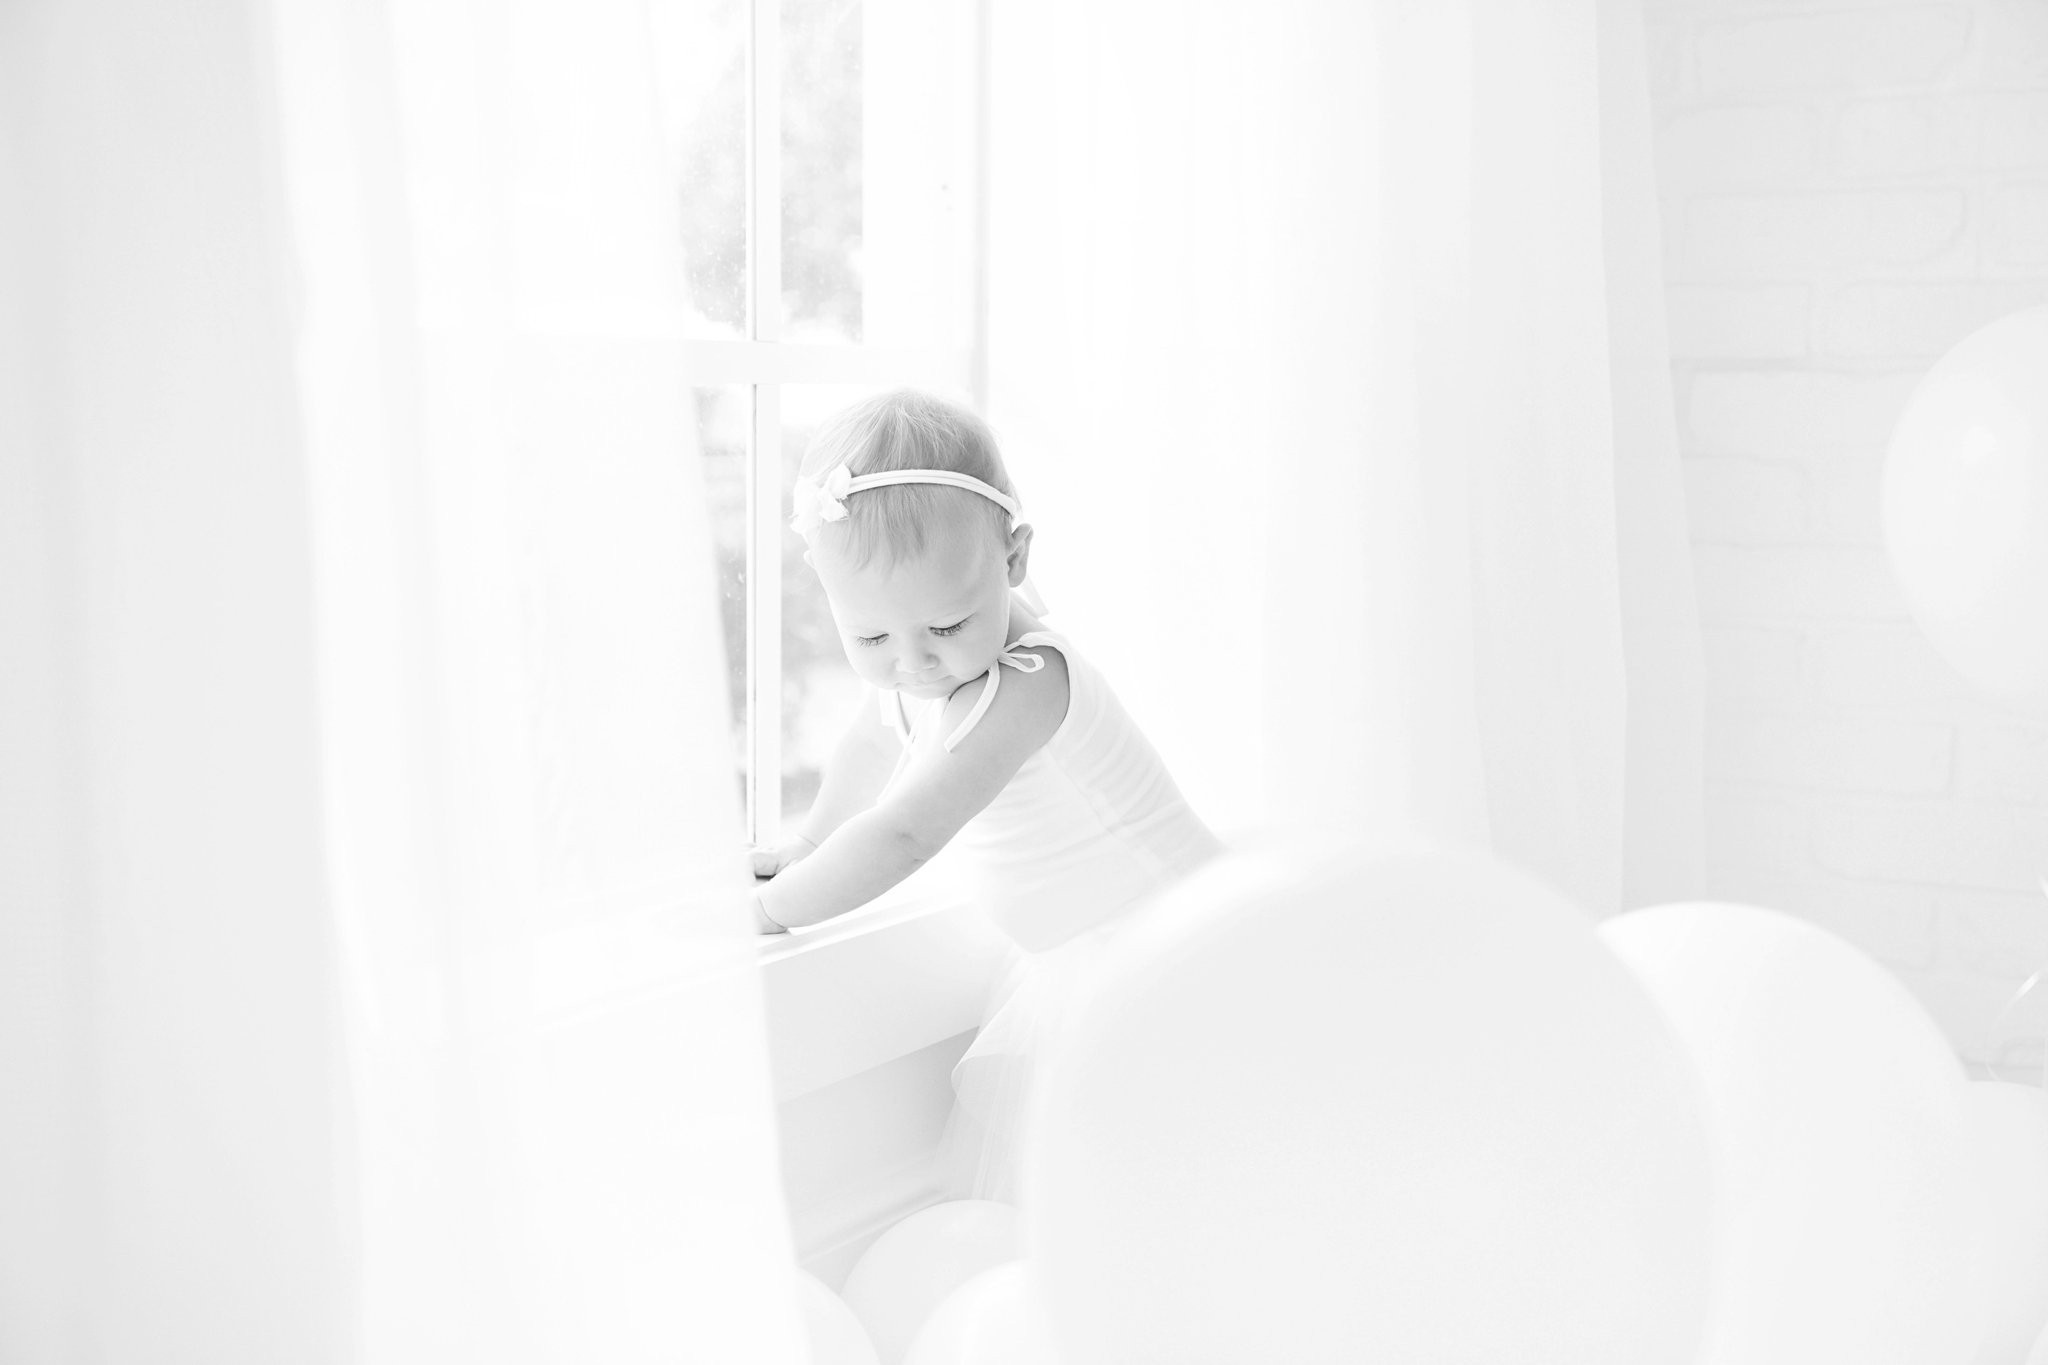 Birthday baby girl being photographed in a south florida photography studio filled with white balloons.